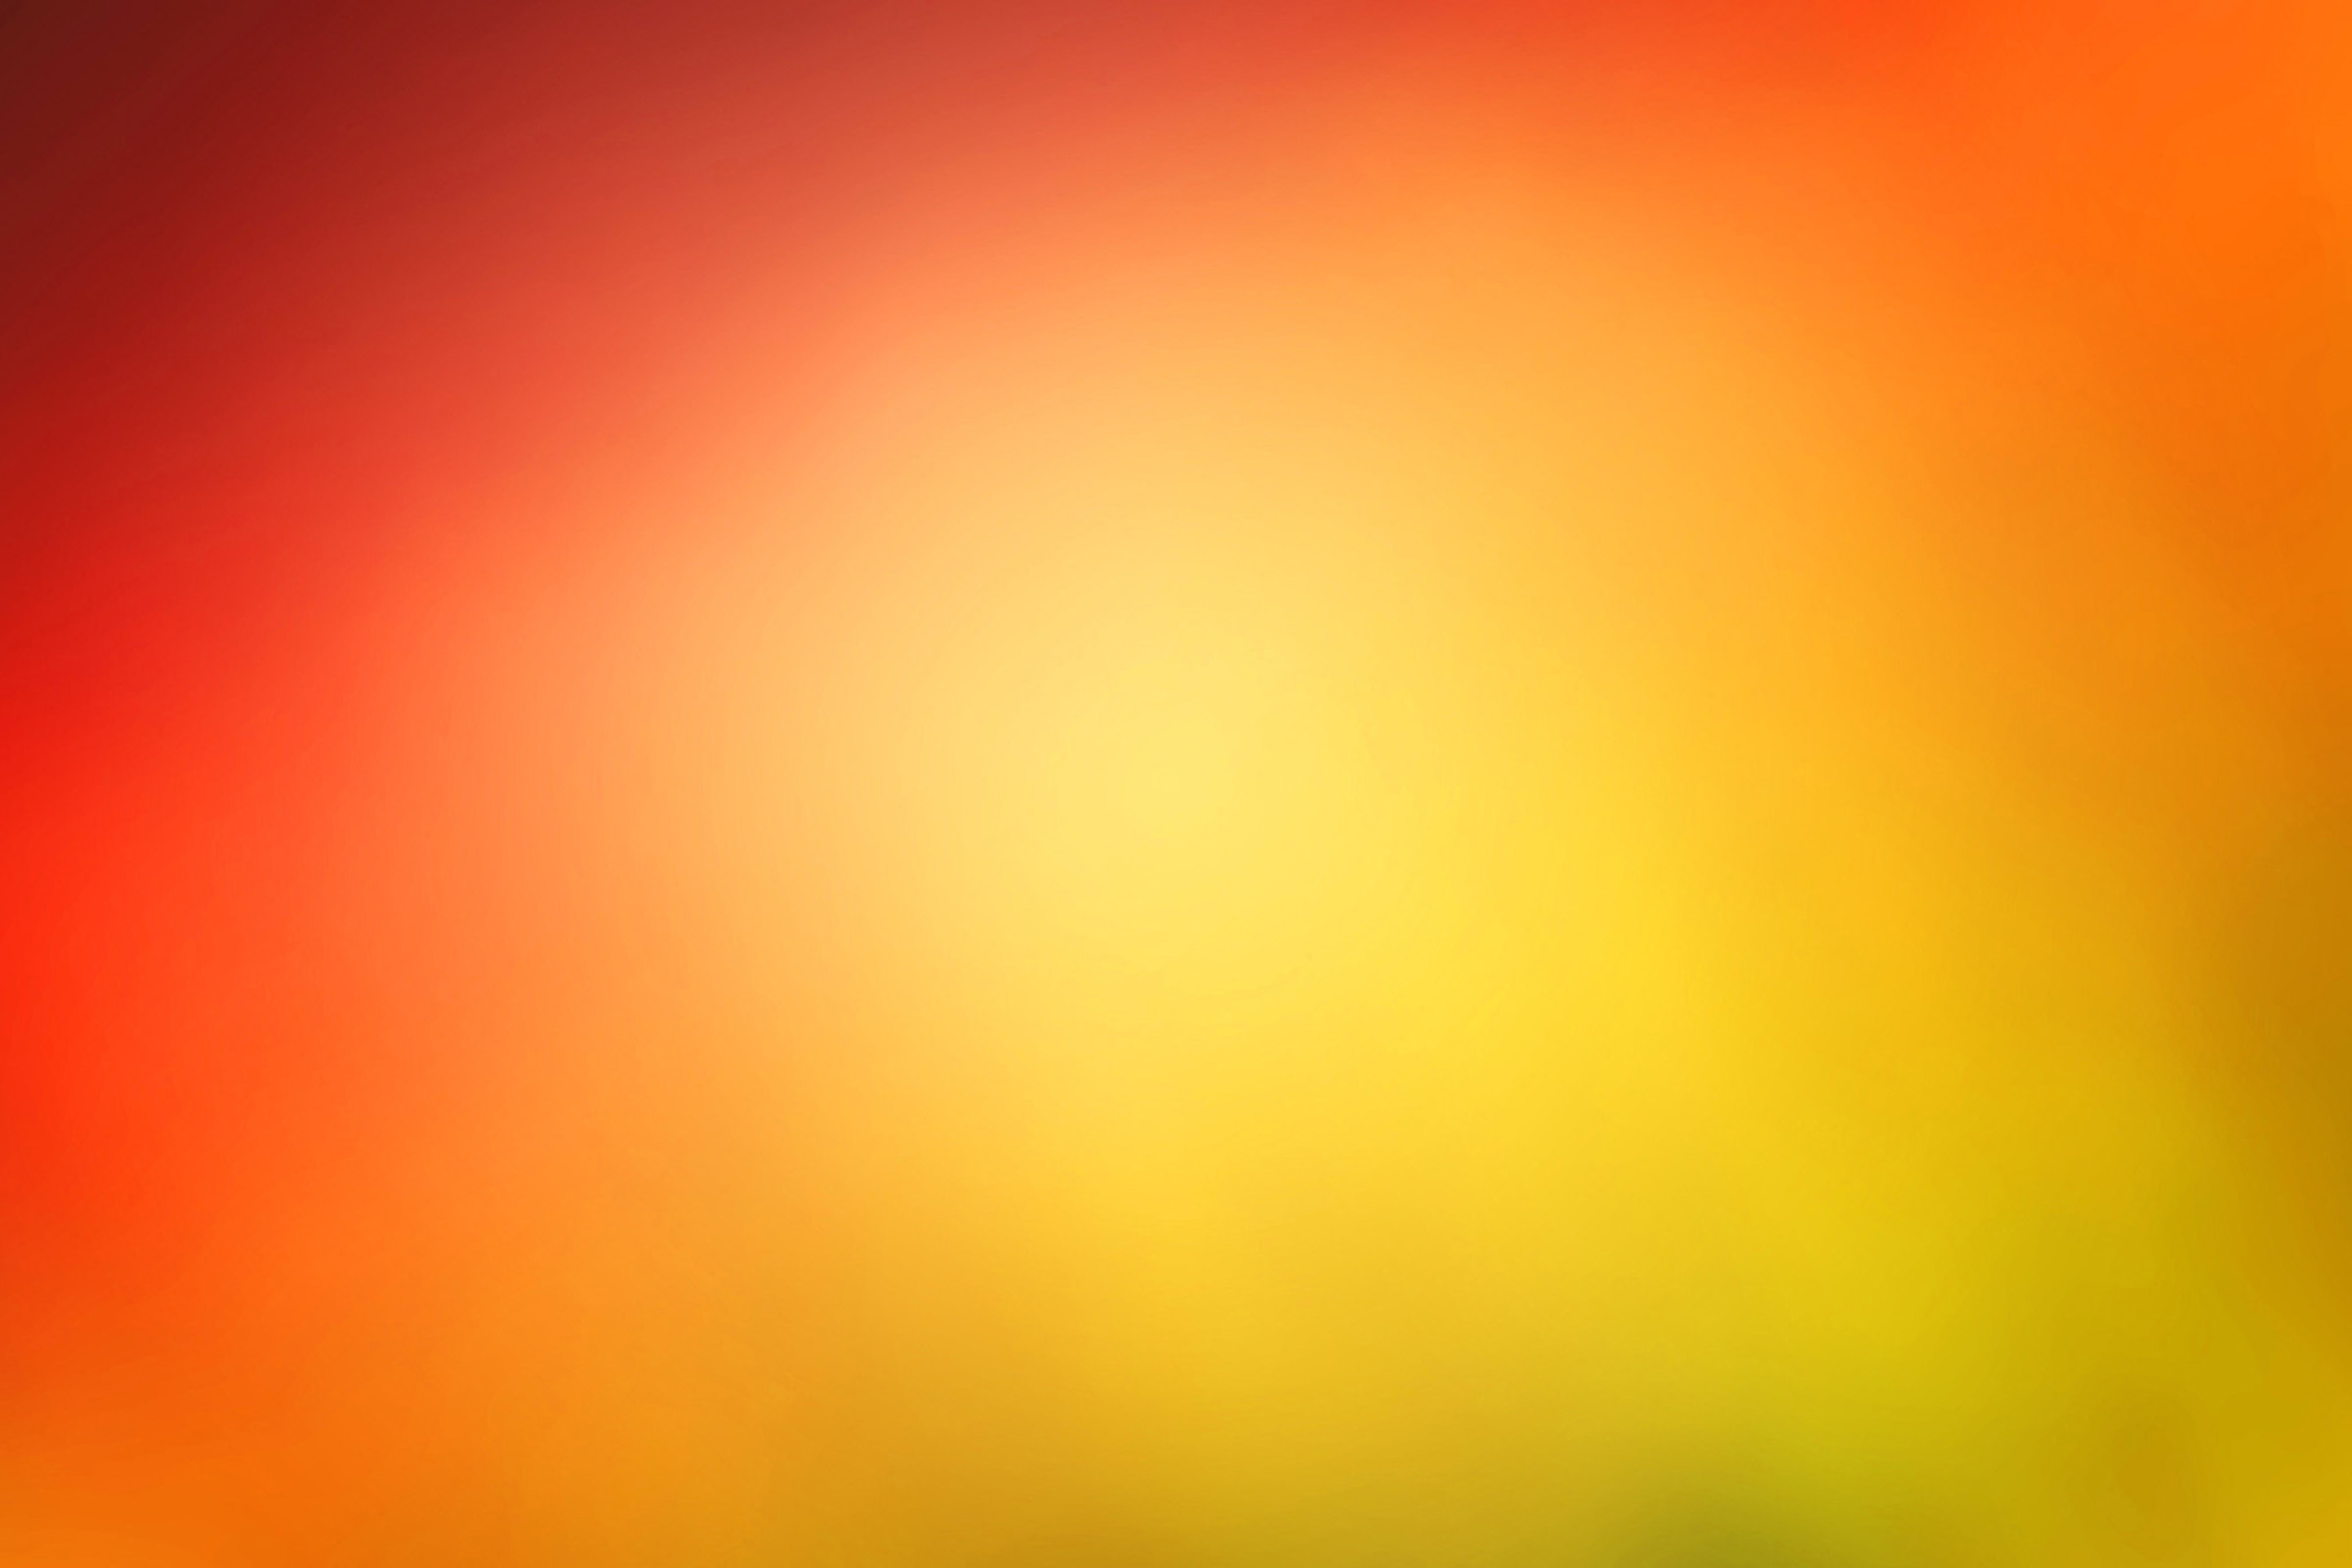 Light Colored Background wallpaper 2880x1920